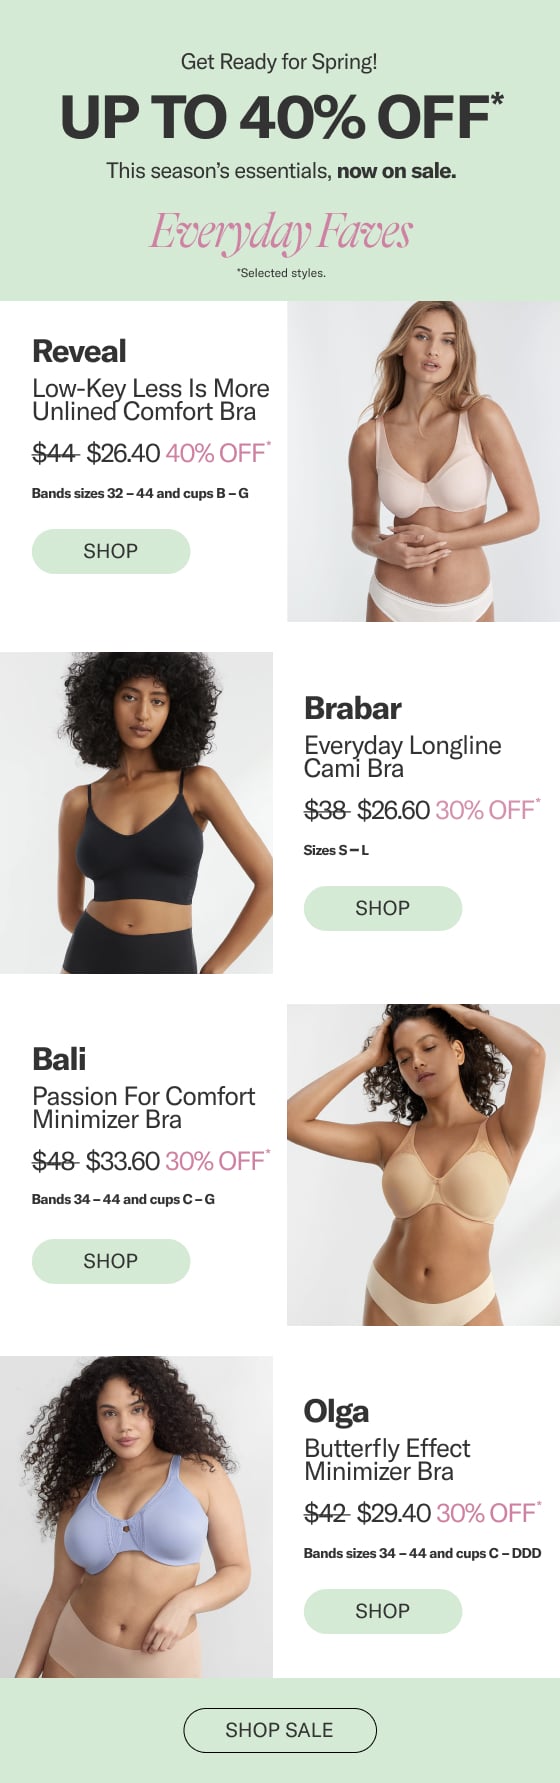 🌼 Spring Into Savings: Get Up To 40% Off Bras - Bare Necessities